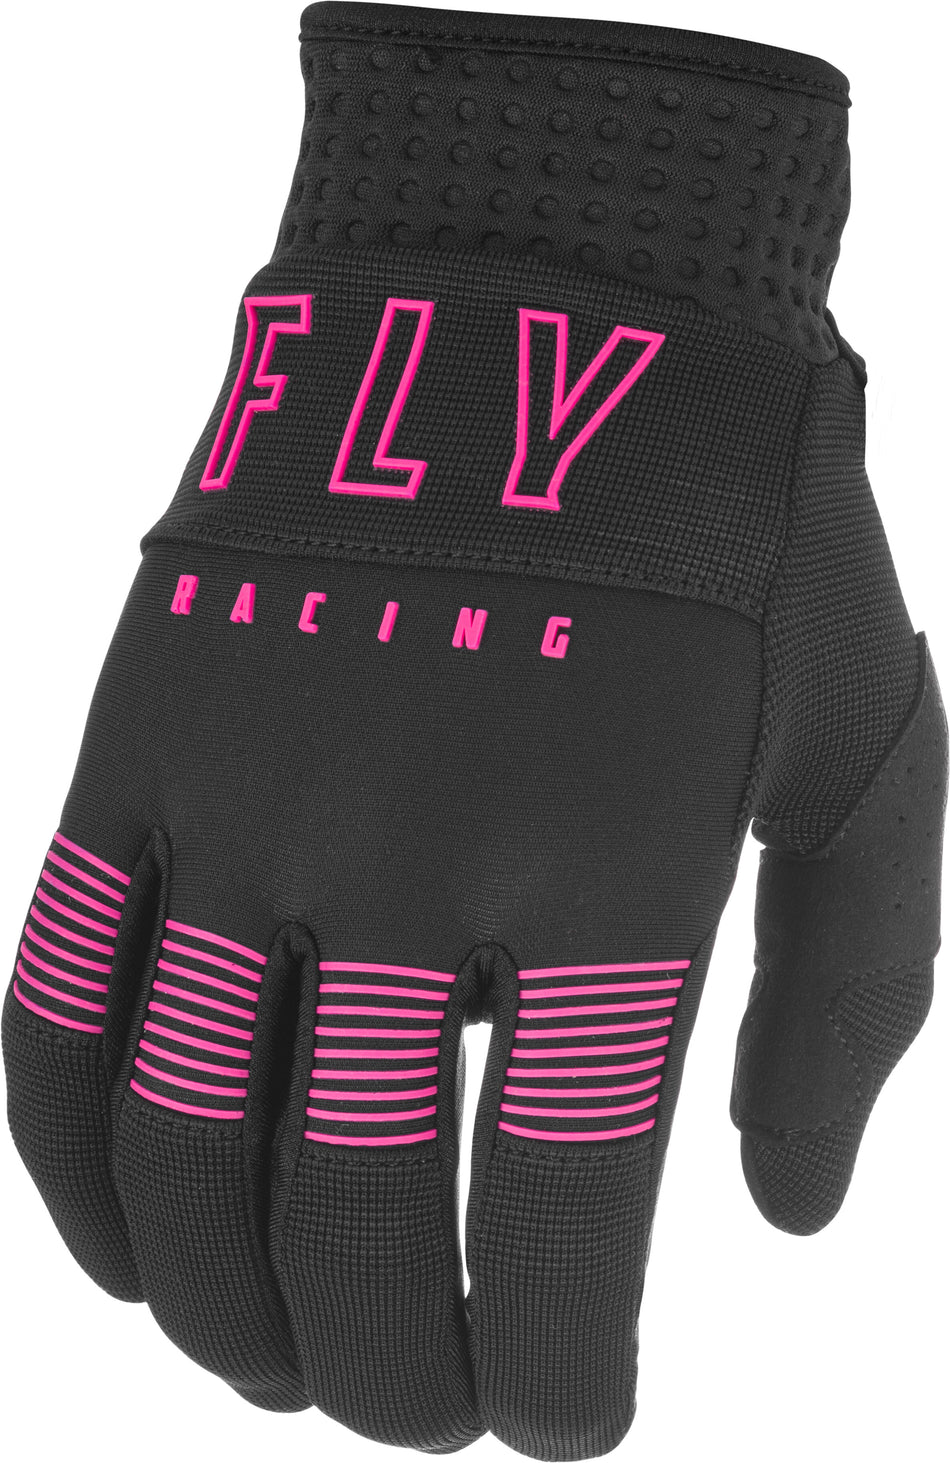 FLY RACING F-16 Gloves Black/Pink Sz 12 374-91812